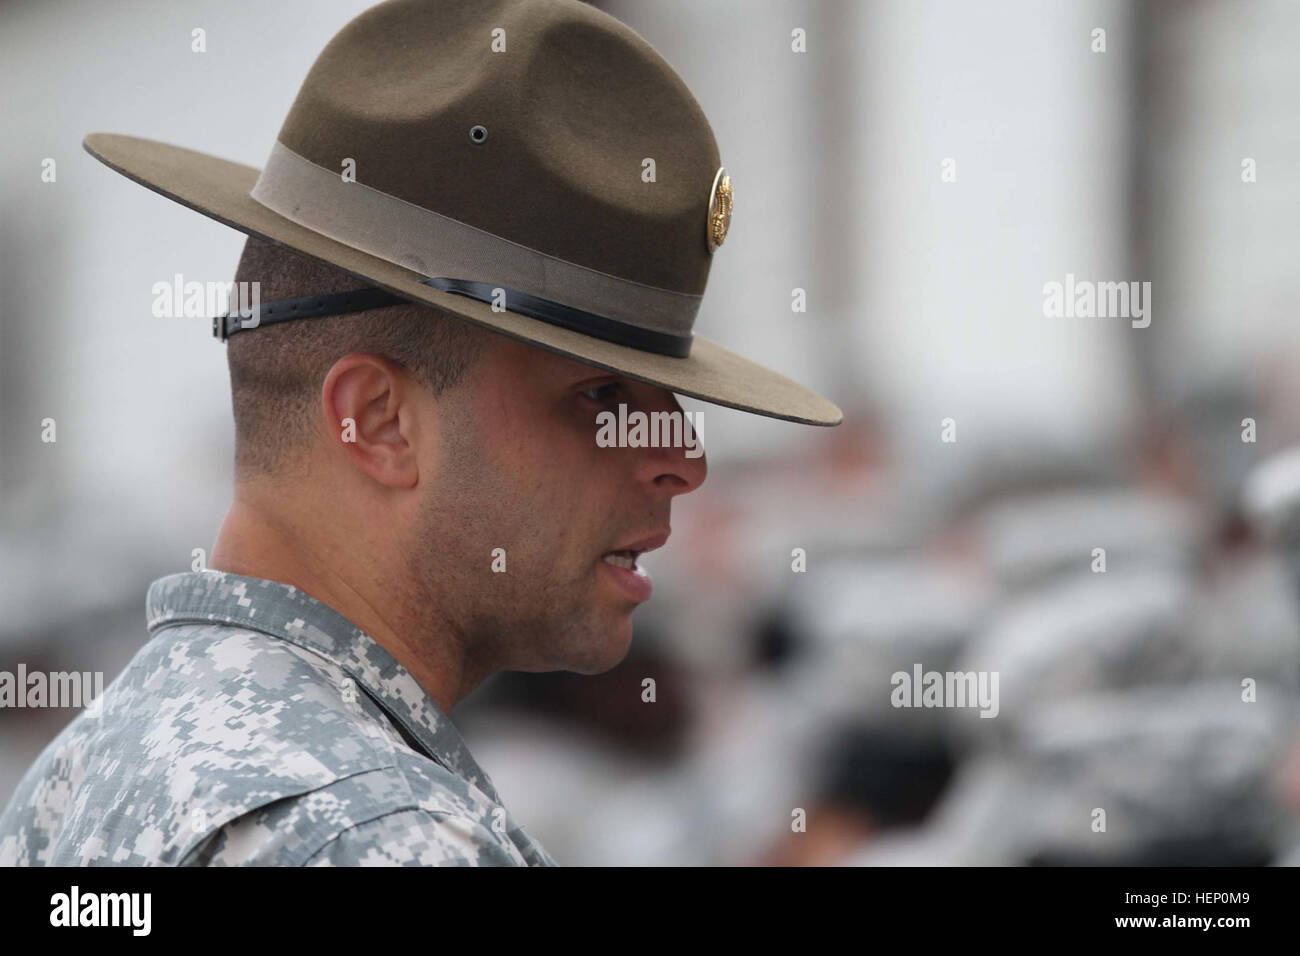 The olive drab headgear worn by male drill sergeants today has a flat brim, Montana Peak and bears a gold disc of the Great Seal of the United States on its front. Infantry Soldiers wear an infantry blue disc under the seal. Drill sergeants first wore this hat in 1964 as a way of distinguishing themselves from those whom they were charged with transforming into Soldiers. It has been their proud symbol ever since. A legendary symbol of pride 141204-A-OY832-705 Stock Photo